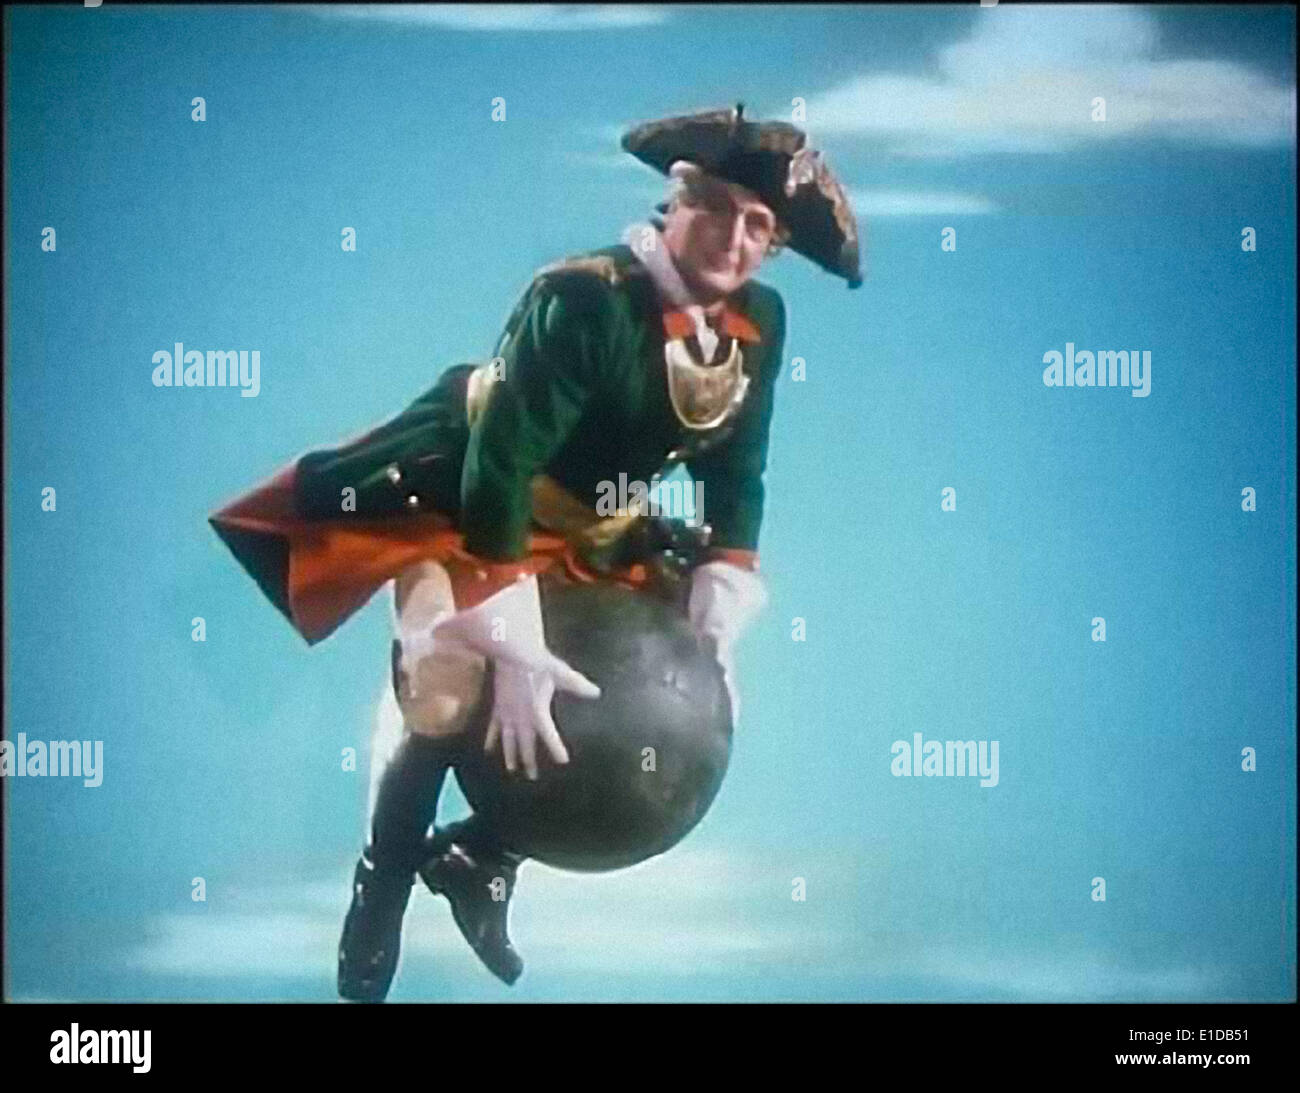 Still from ‘The Adventures of Baron Munchausen’ (Münchhausen) released in 1943 directed by Josef von Báky, starring Hans Albers. Stock Photo